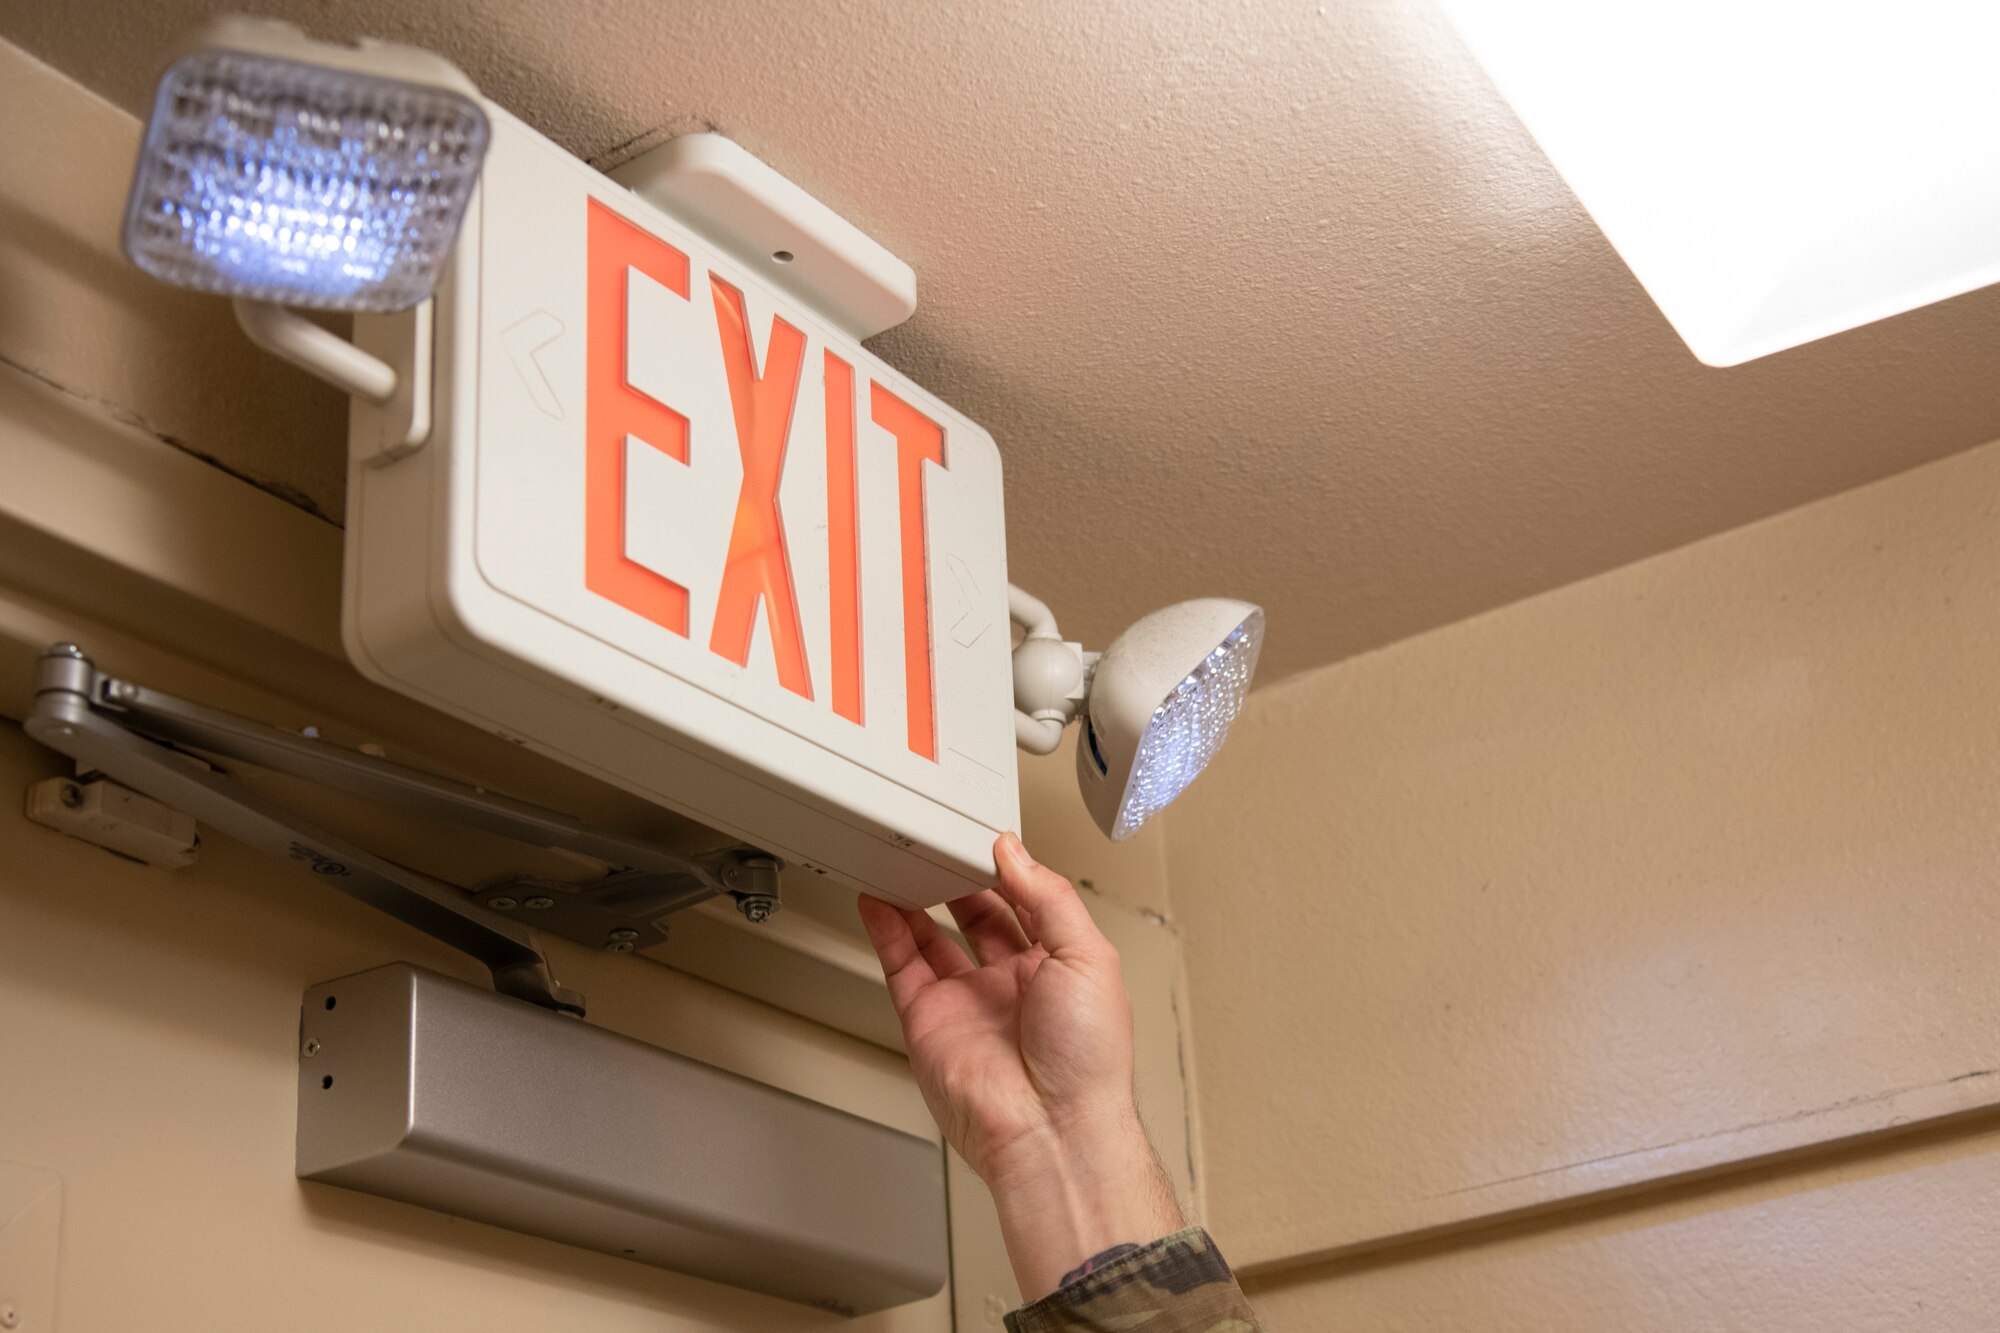 U.S. Air Force Staff Sgt. Kurtis Vandevender, a 1st Special Operations Wing occupational safety technician, tests an exit sign’s emergency lights Feb. 15, 2022, at Hurlburt Field, Florida.